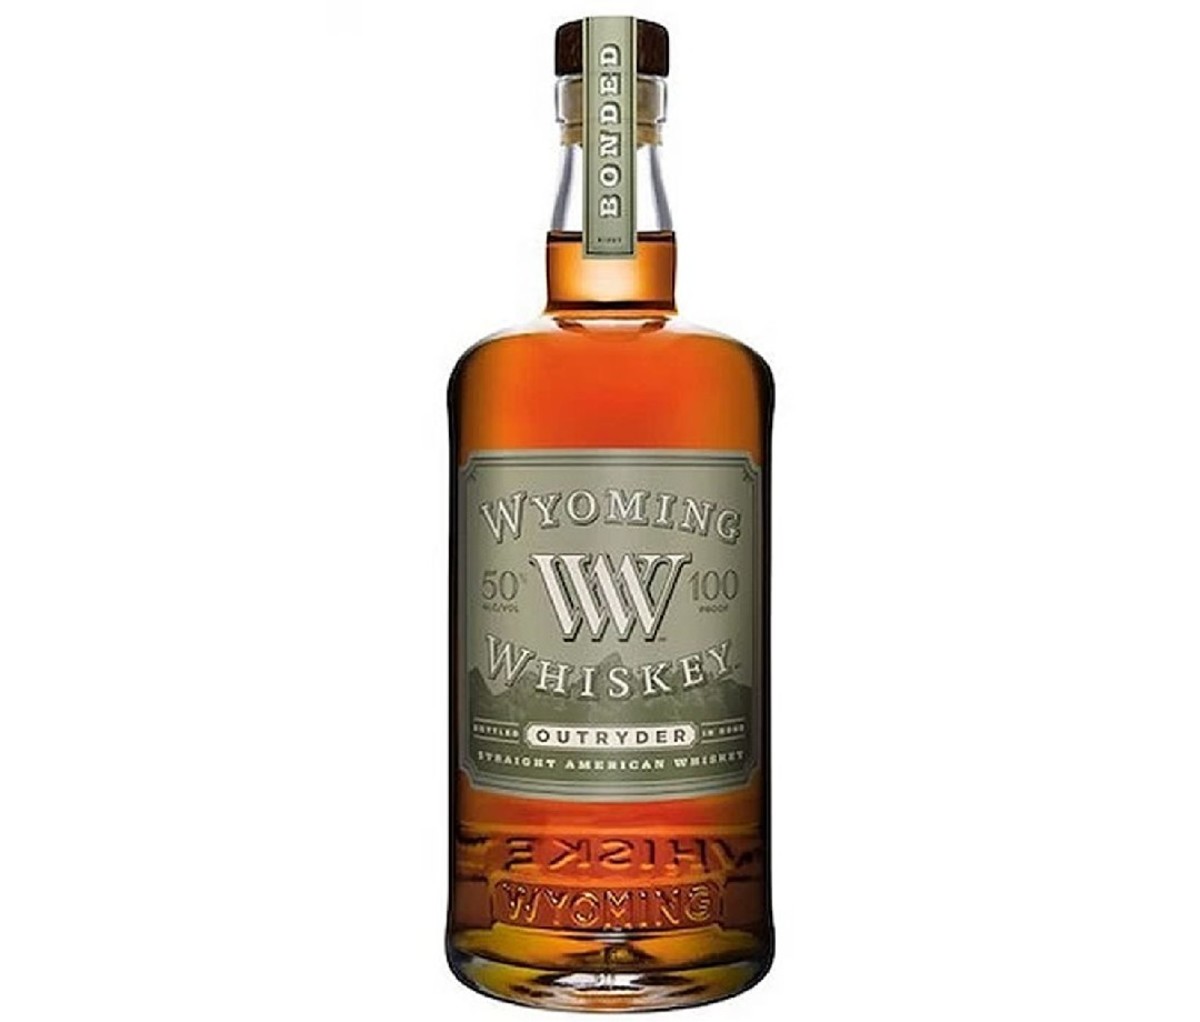 Bottle of Wyoming Whiskey Outryder